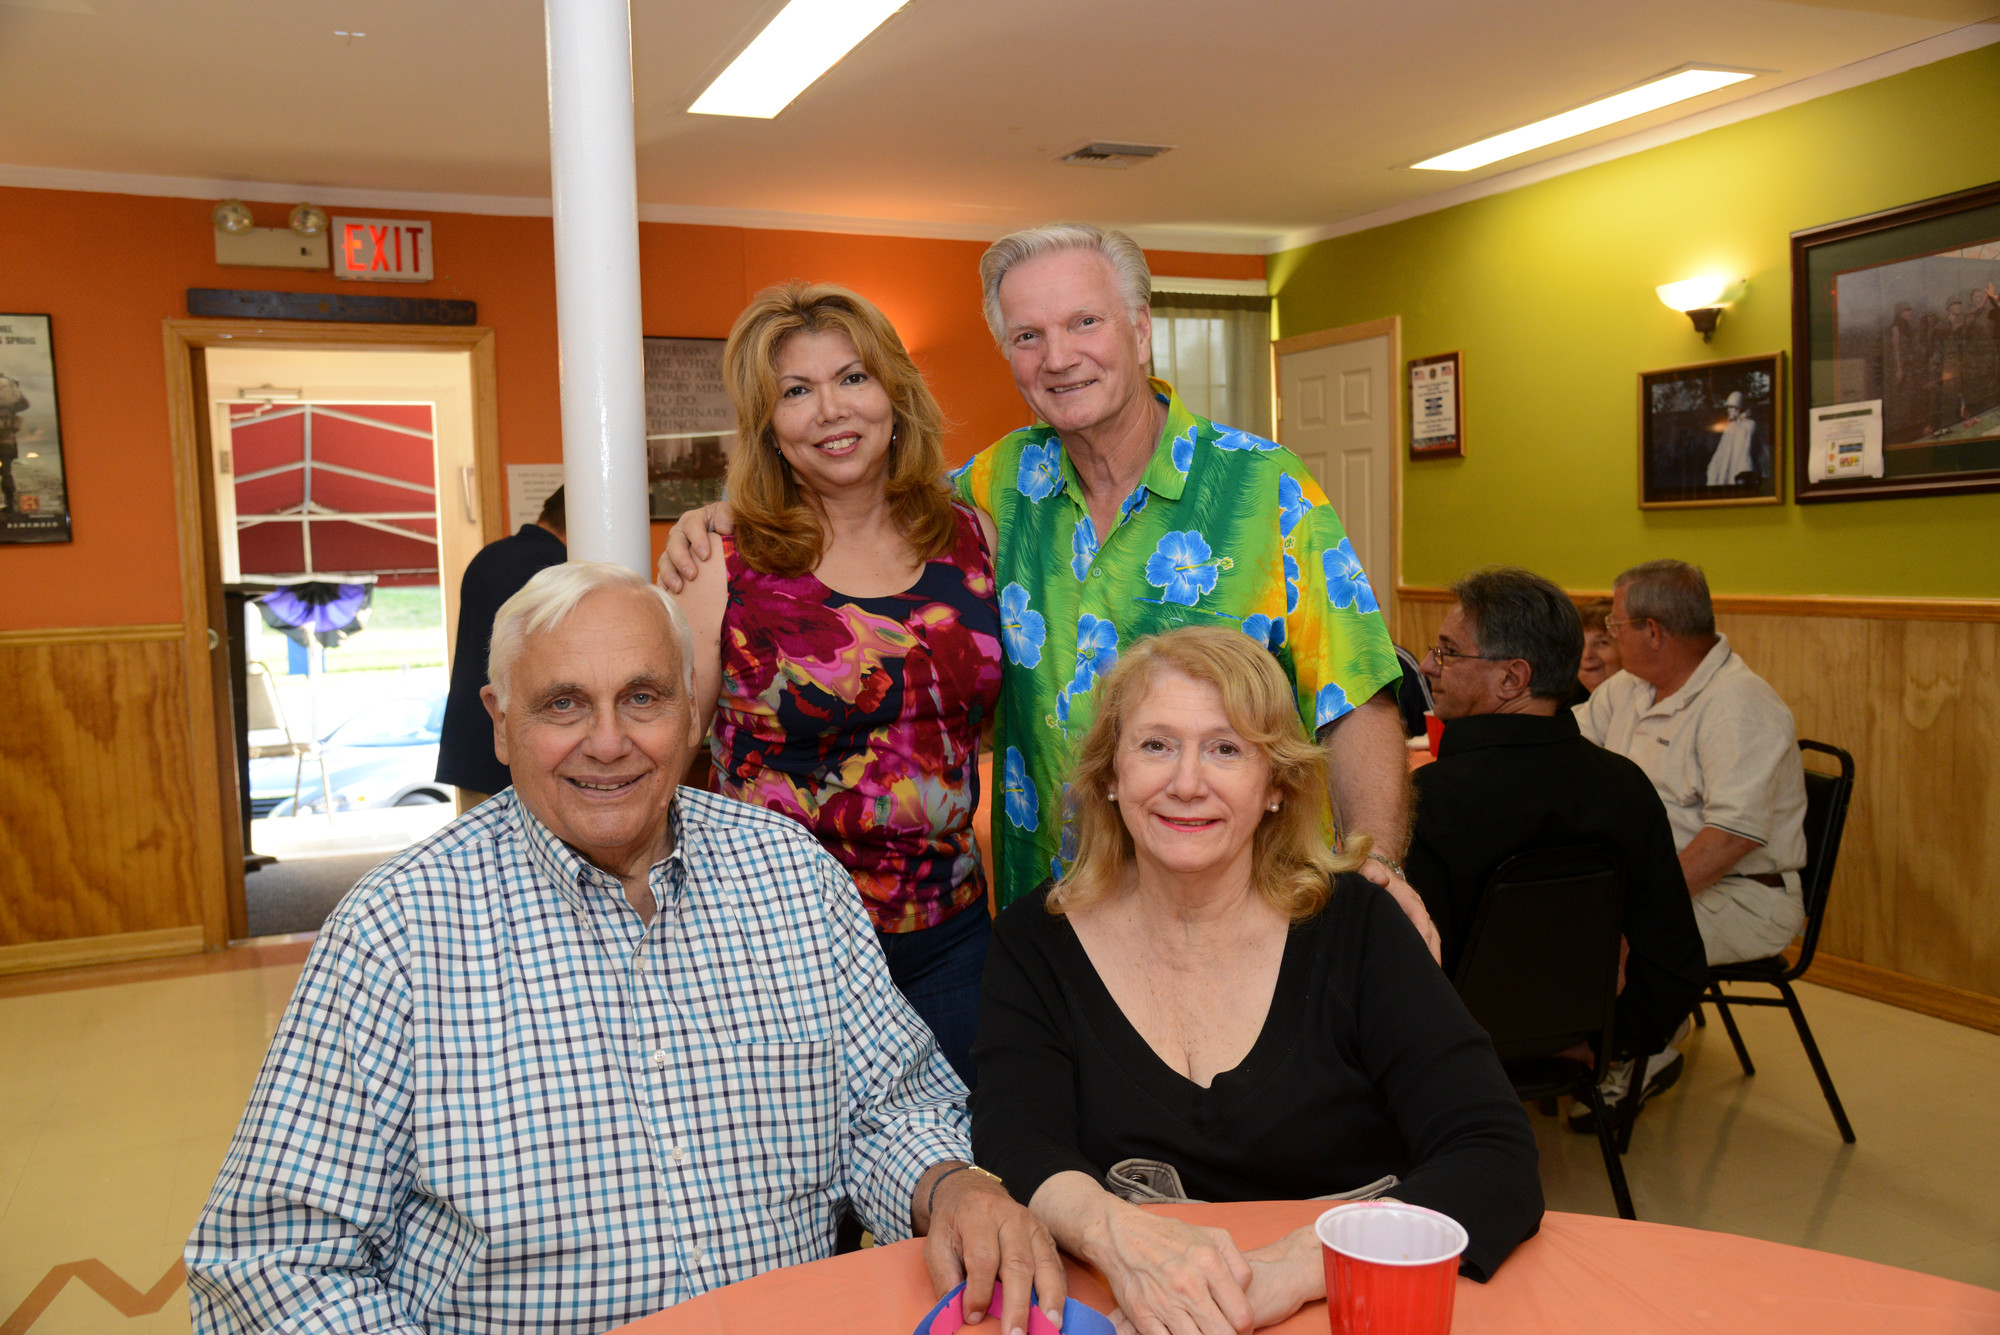 fellow Kiwanis Guests at the East Rockaway Kiwanis BBQ  from Island Park - seated Mikey and Marie Hastava, standing  from Baldwin Martha and Peter Meitenkorte